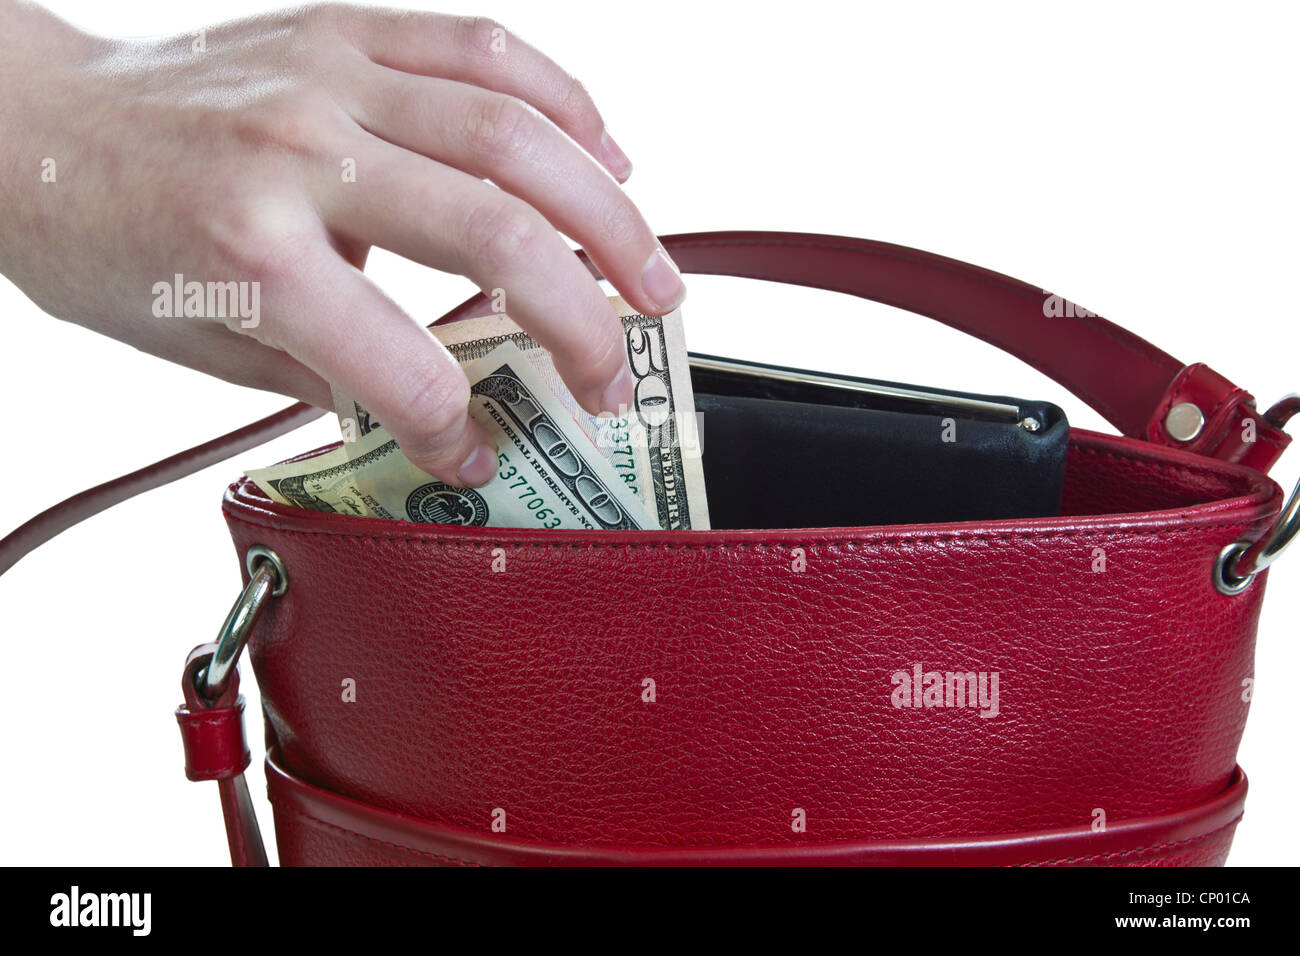 Money being taken out of red purse on white background Stock Photo